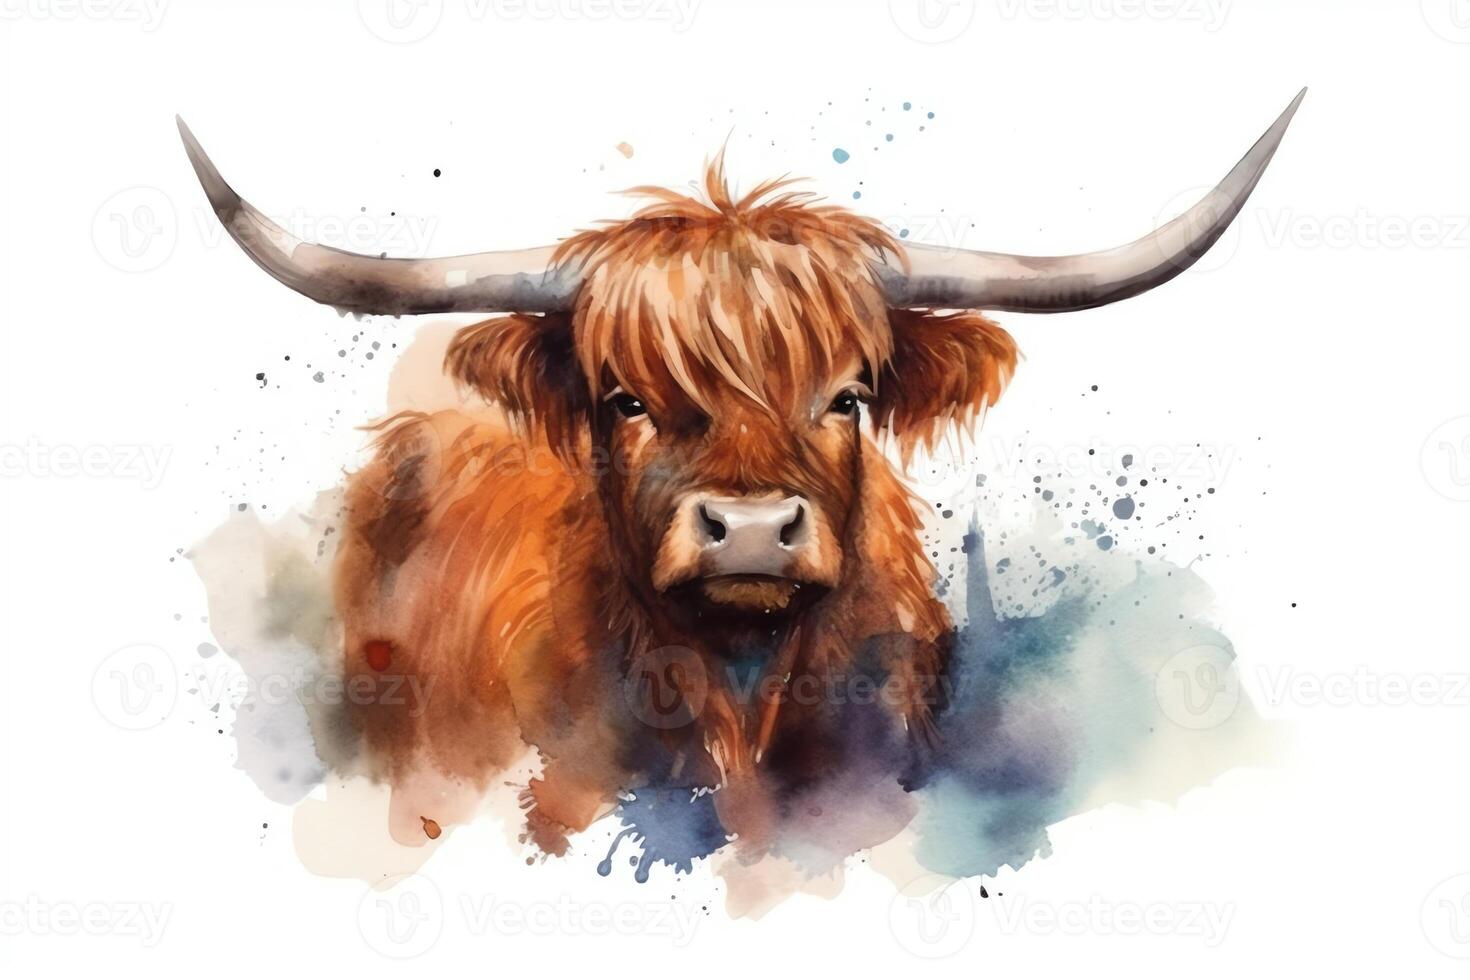 Cattle from scotland highland cow from scotland the bull had horns isolated with space to write your own words aquarelle watercolor illustration. photo